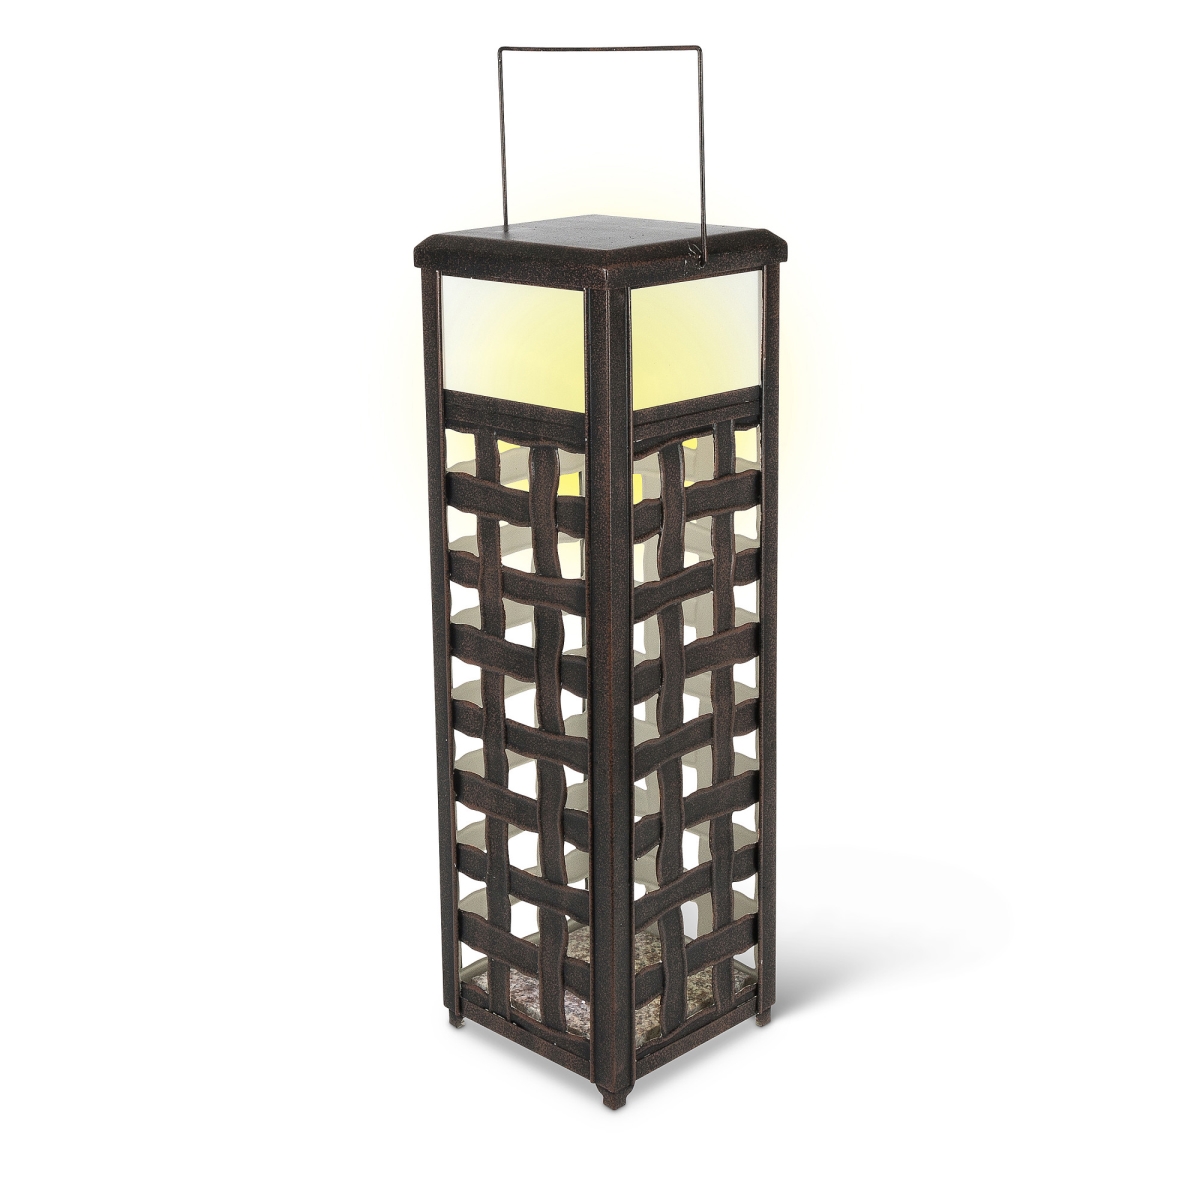 Gerson 44123ec 23.5 In. Battery-powered Rustic Brown Lantern With Warm White Led & 5-hour Timer